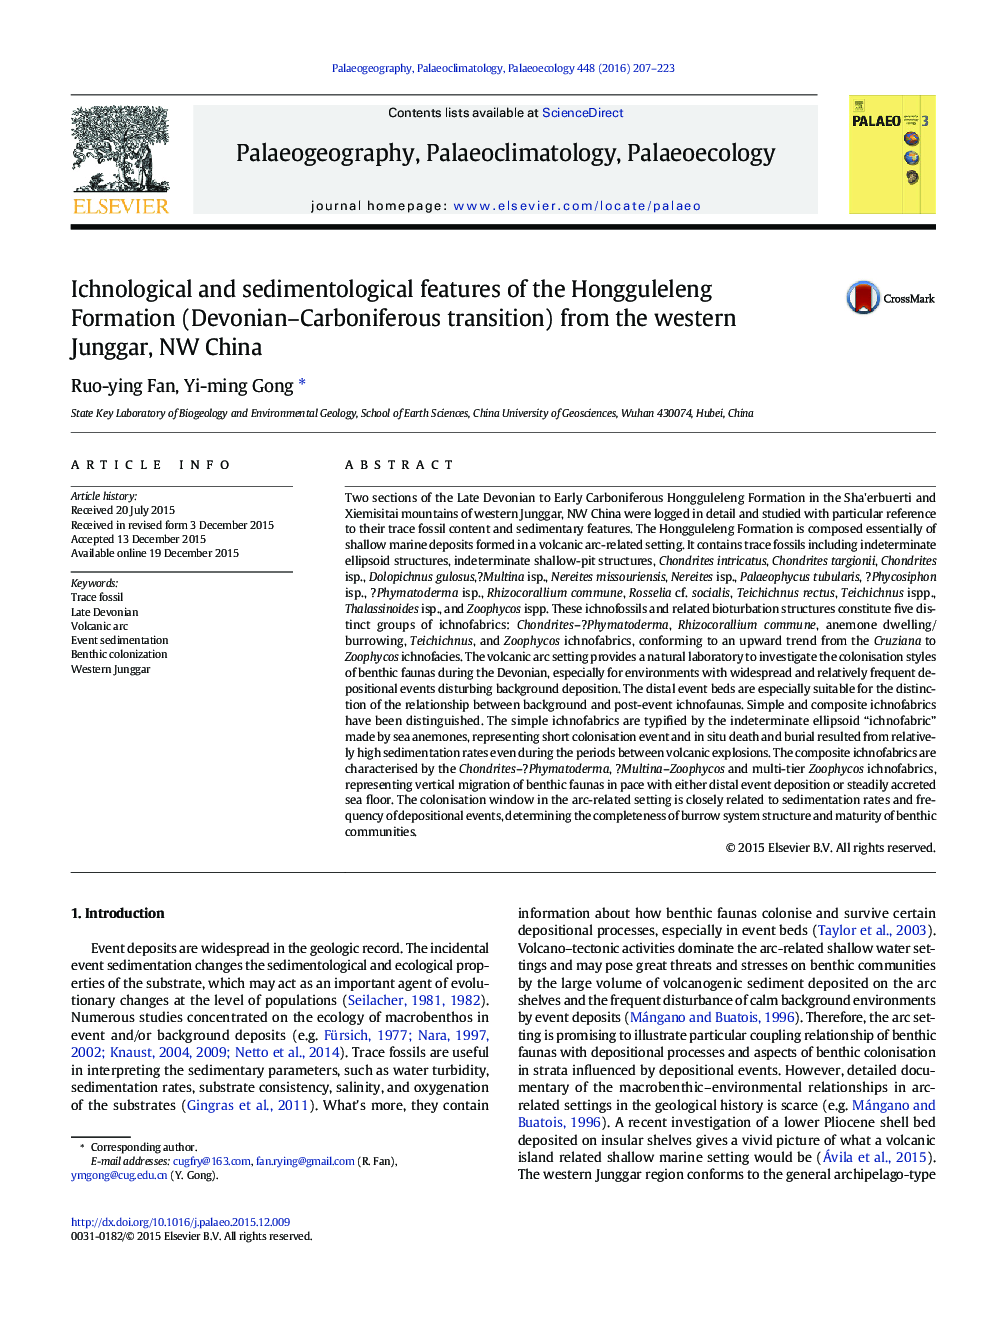 Ichnological and sedimentological features of the Hongguleleng Formation (Devonian–Carboniferous transition) from the western Junggar, NW China